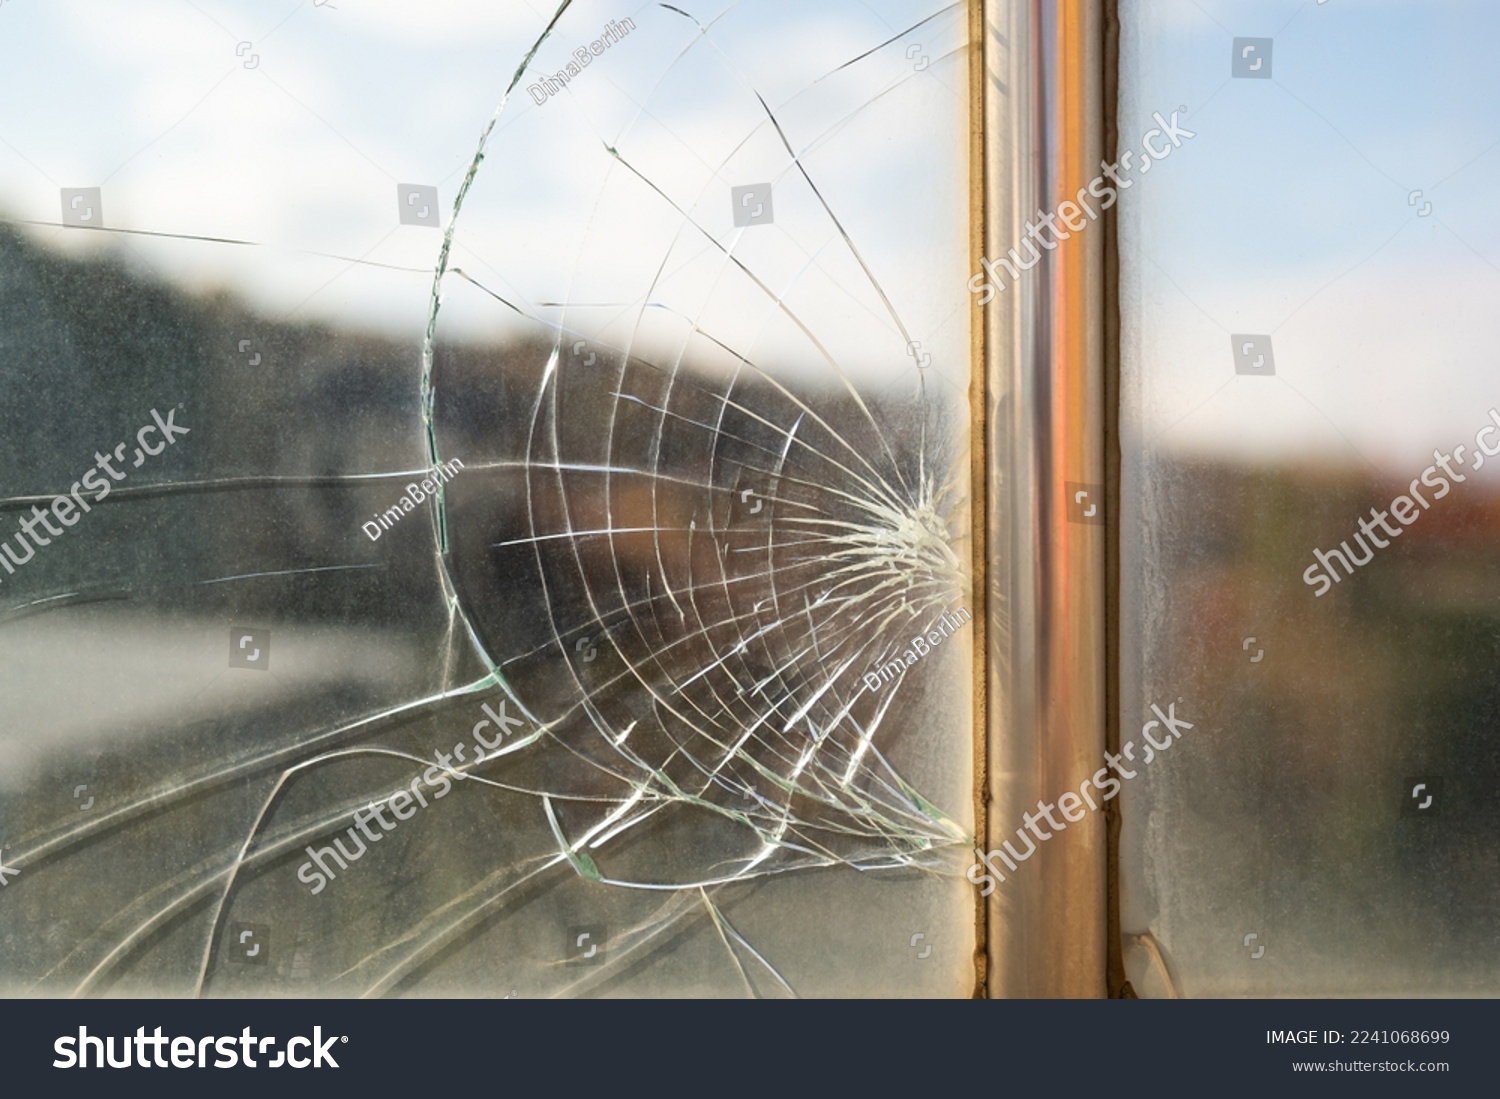 Dirty broken glass with cracks from stone hit or beak from bird flying near creation. Unwashed window with view of picturesque nature with metal partition and traces of breakage needs to be replaced  #2241068699